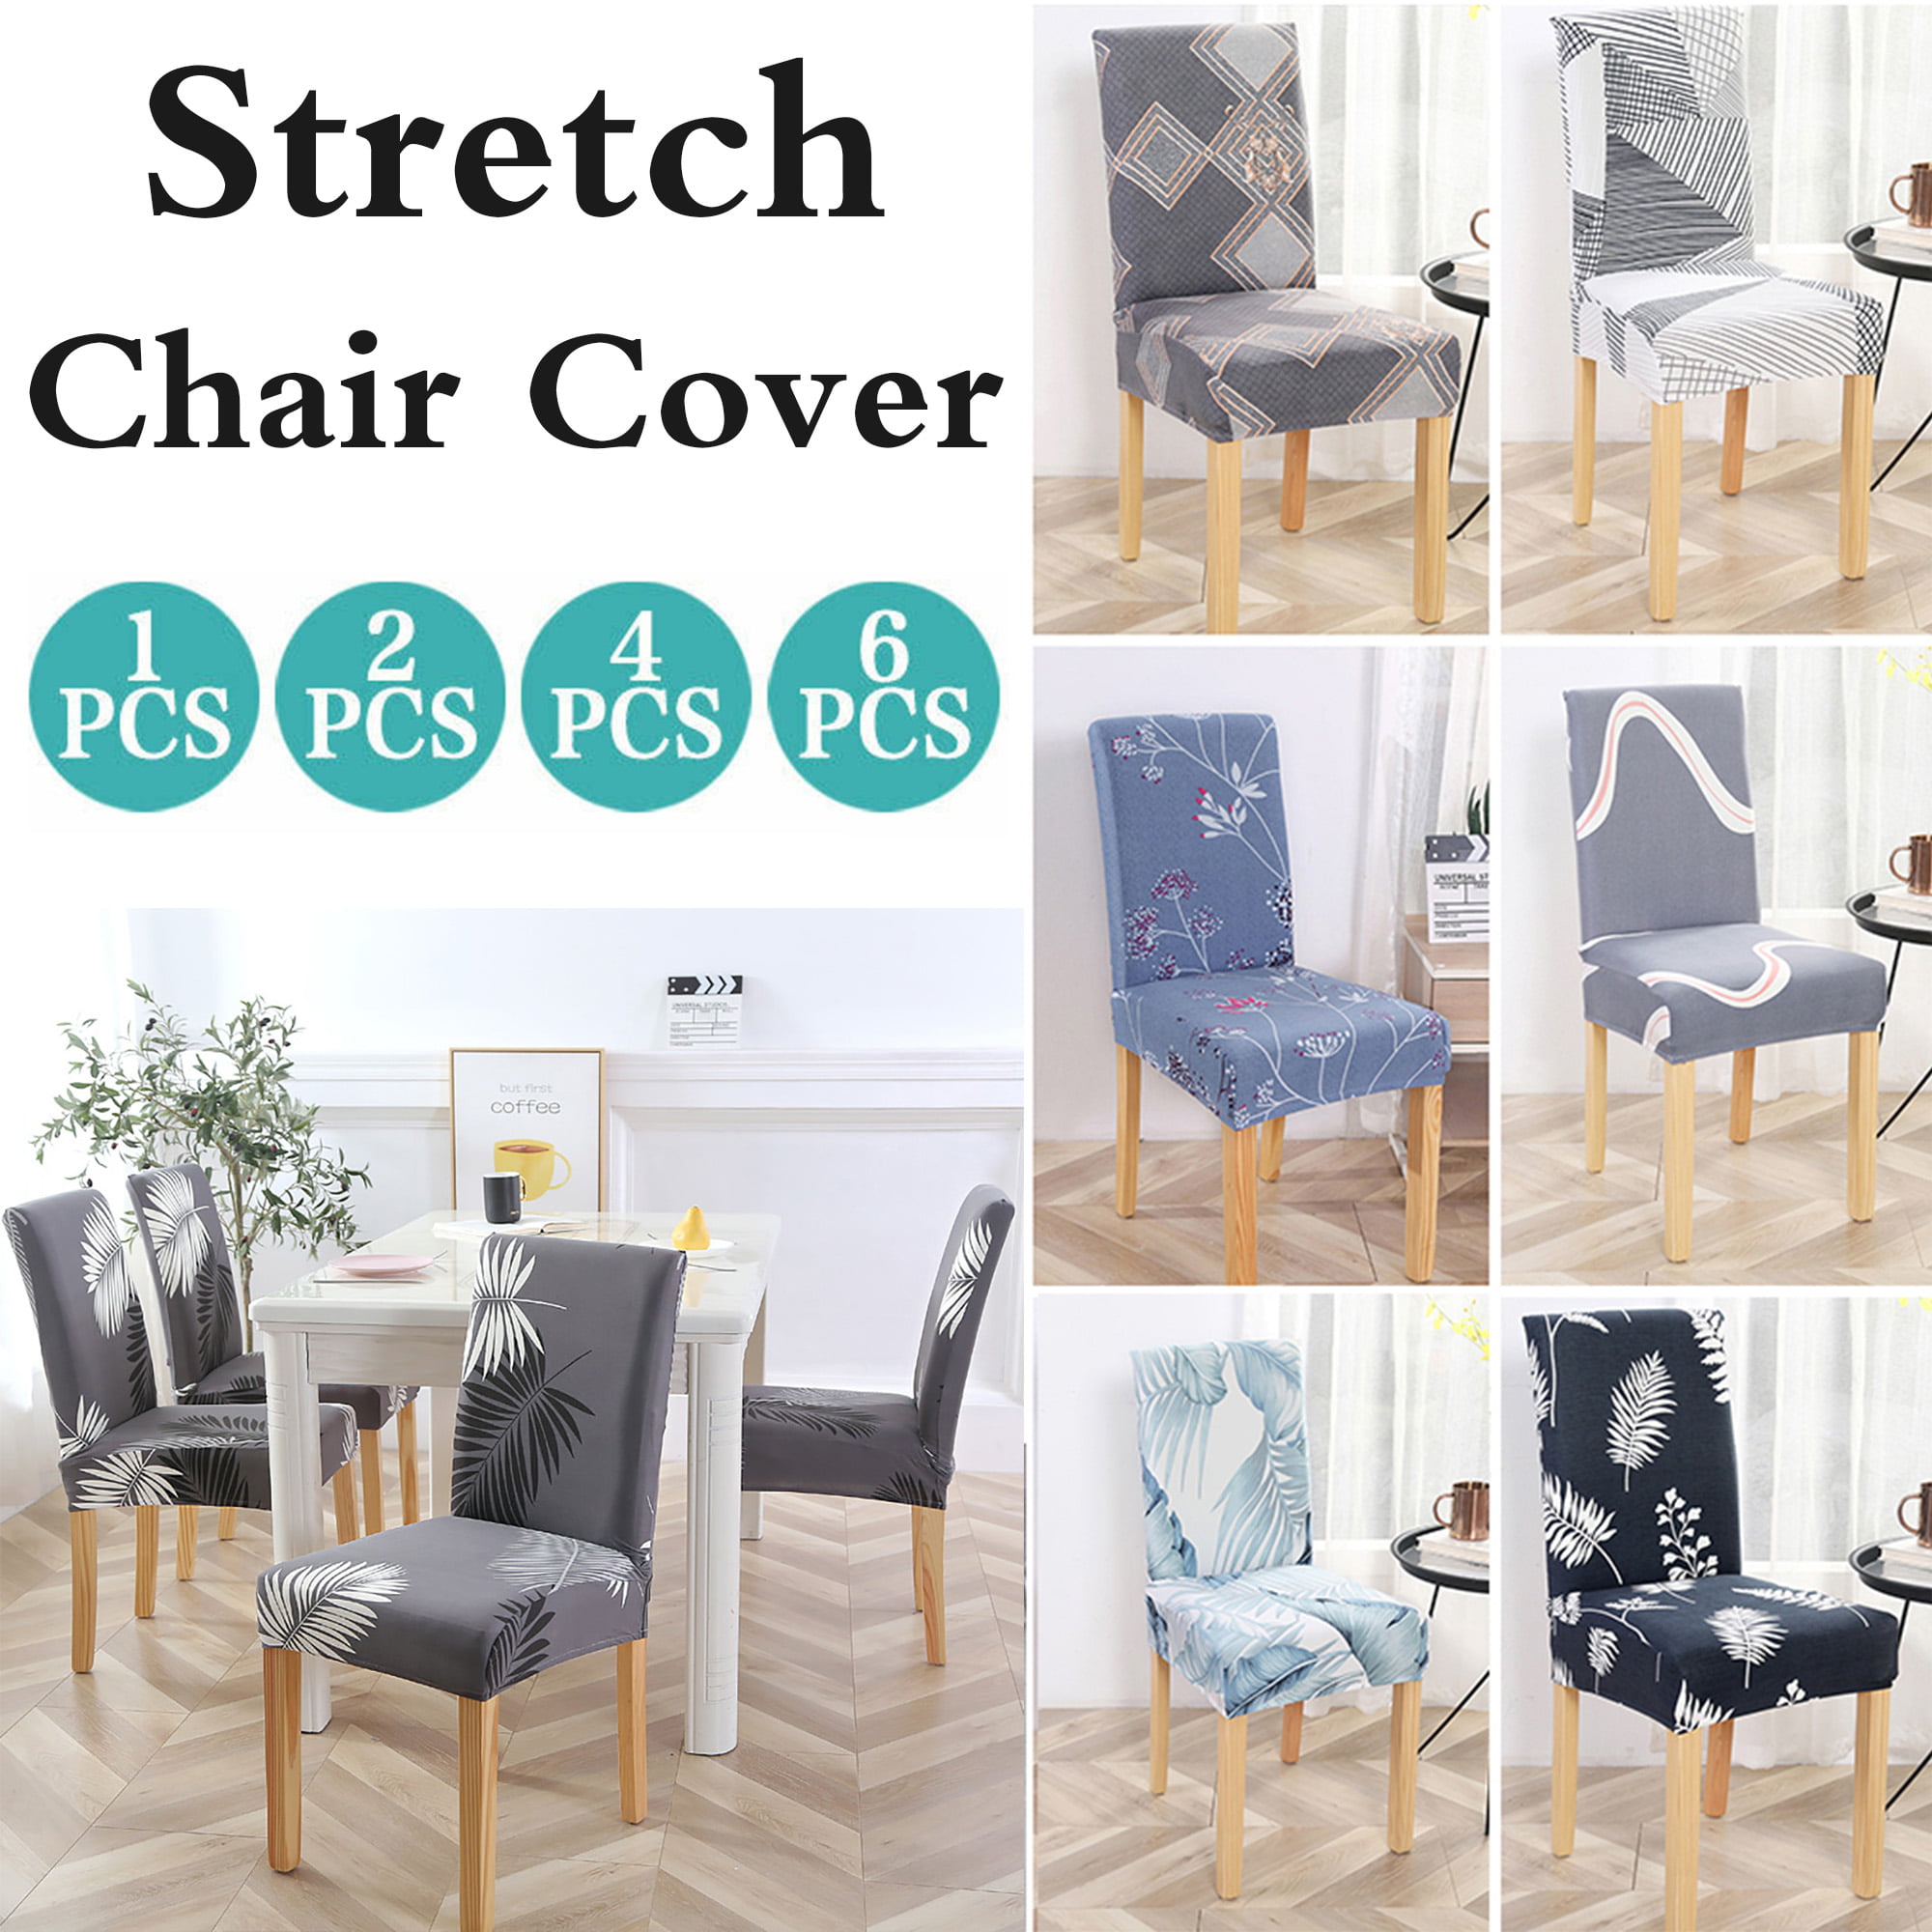 Details about   6PCS Home Dining Chair Seat Covers Soft Removable Elastic Stretch Slipcovers-Q 